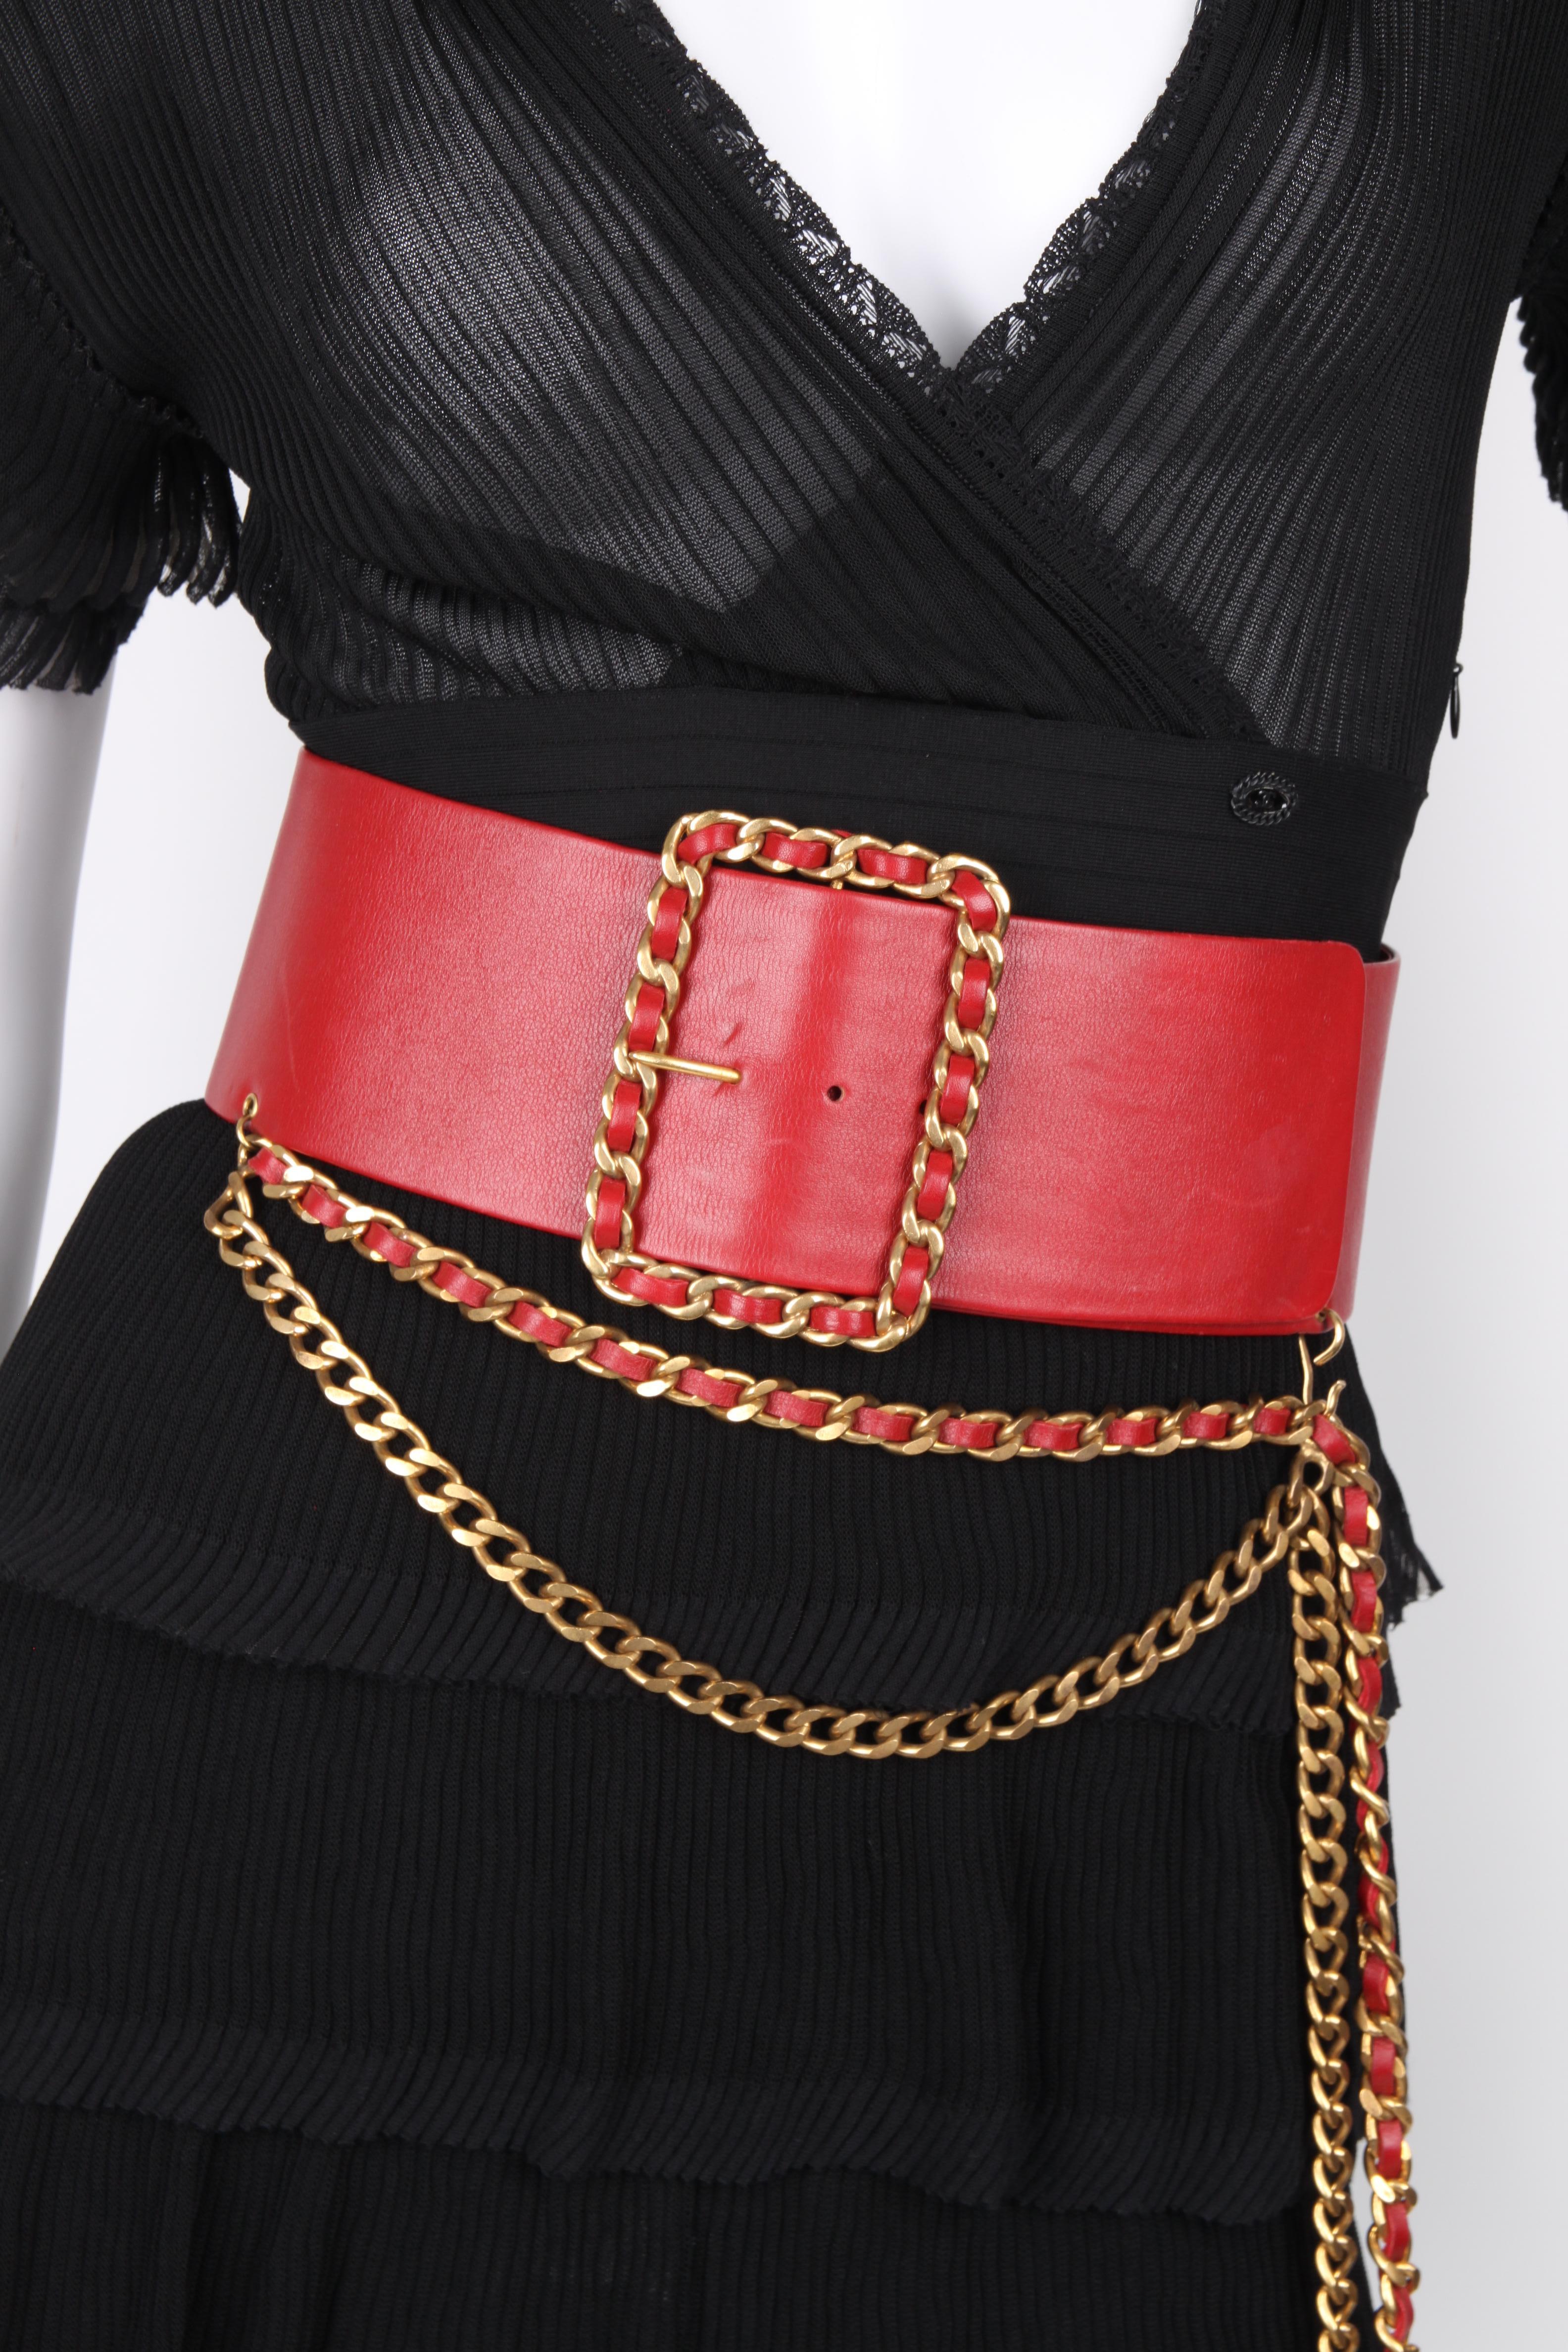 Chanel 1991 Wide Long Chain Medallion Red Leather Belt In Excellent Condition For Sale In Baarn, NL